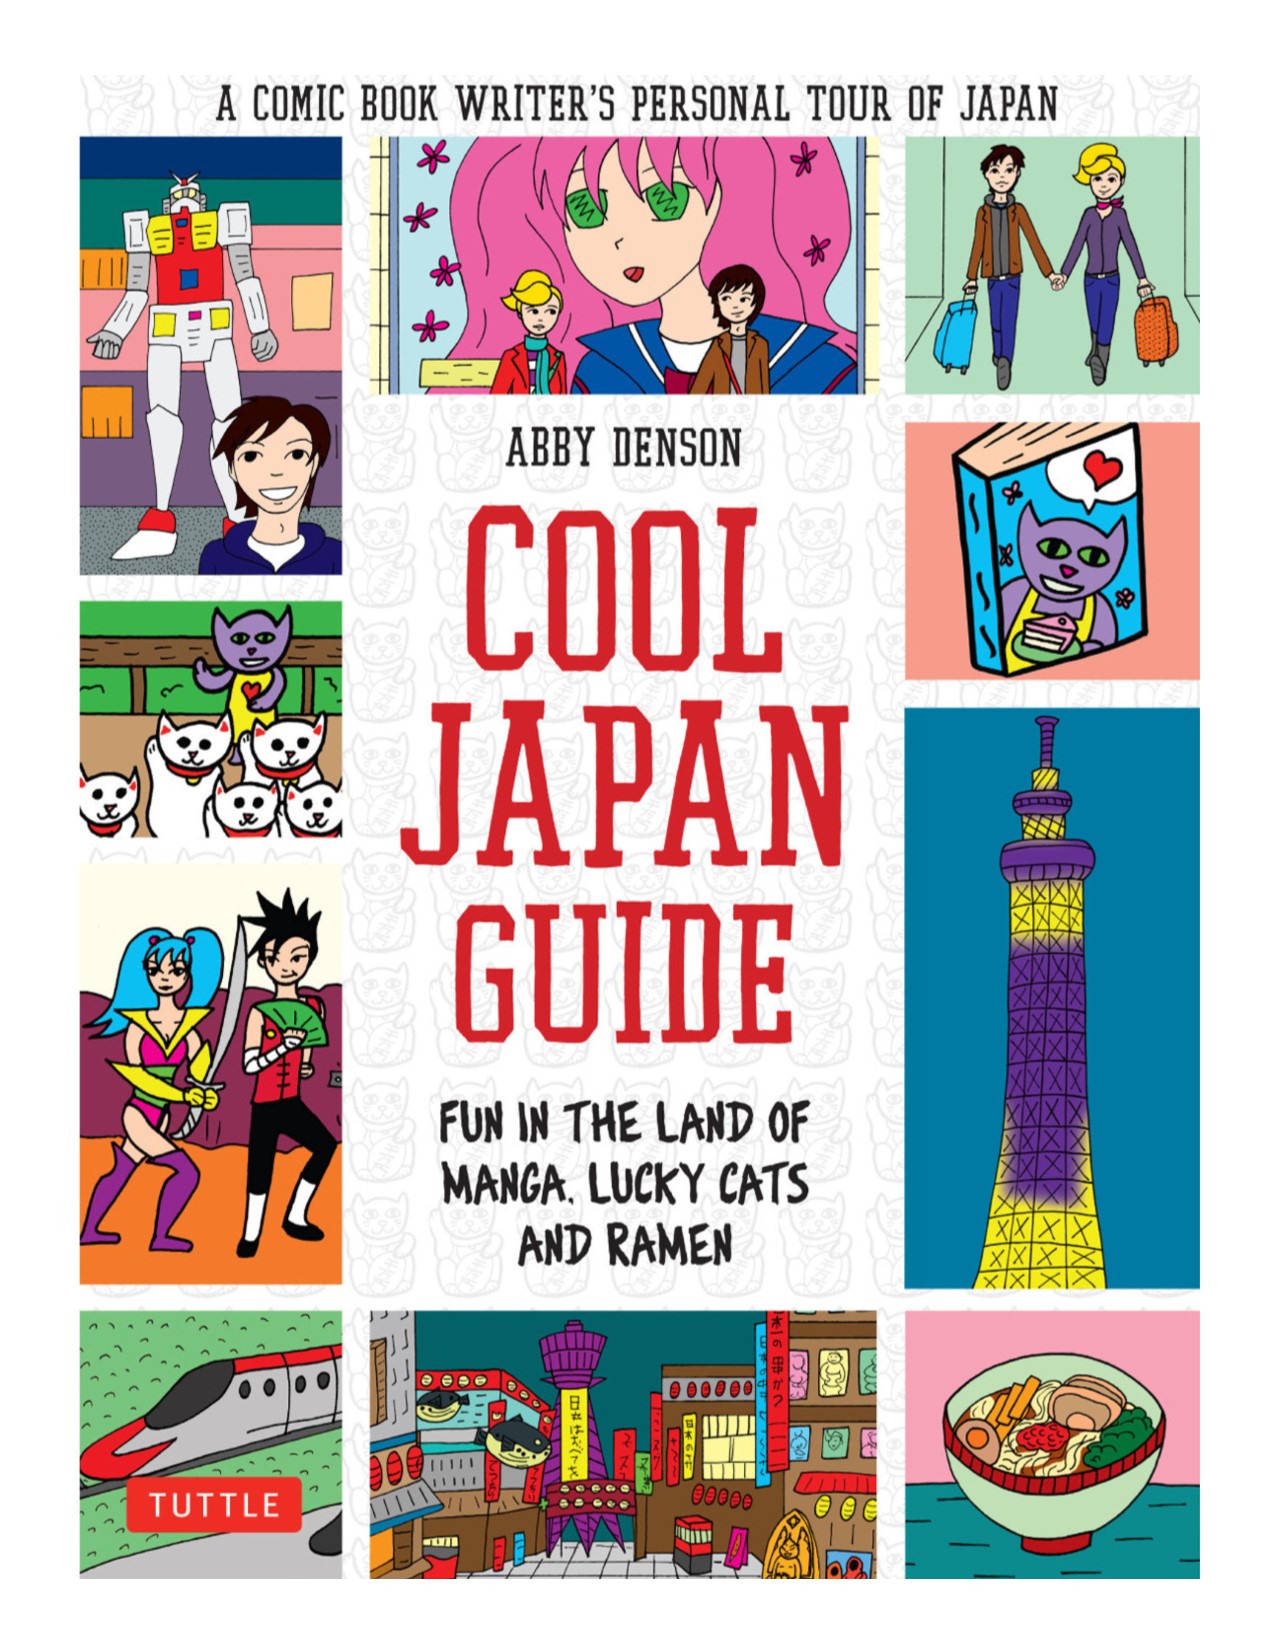 Cool Japan guide fun in the land of manga, lucky cats, and ramen